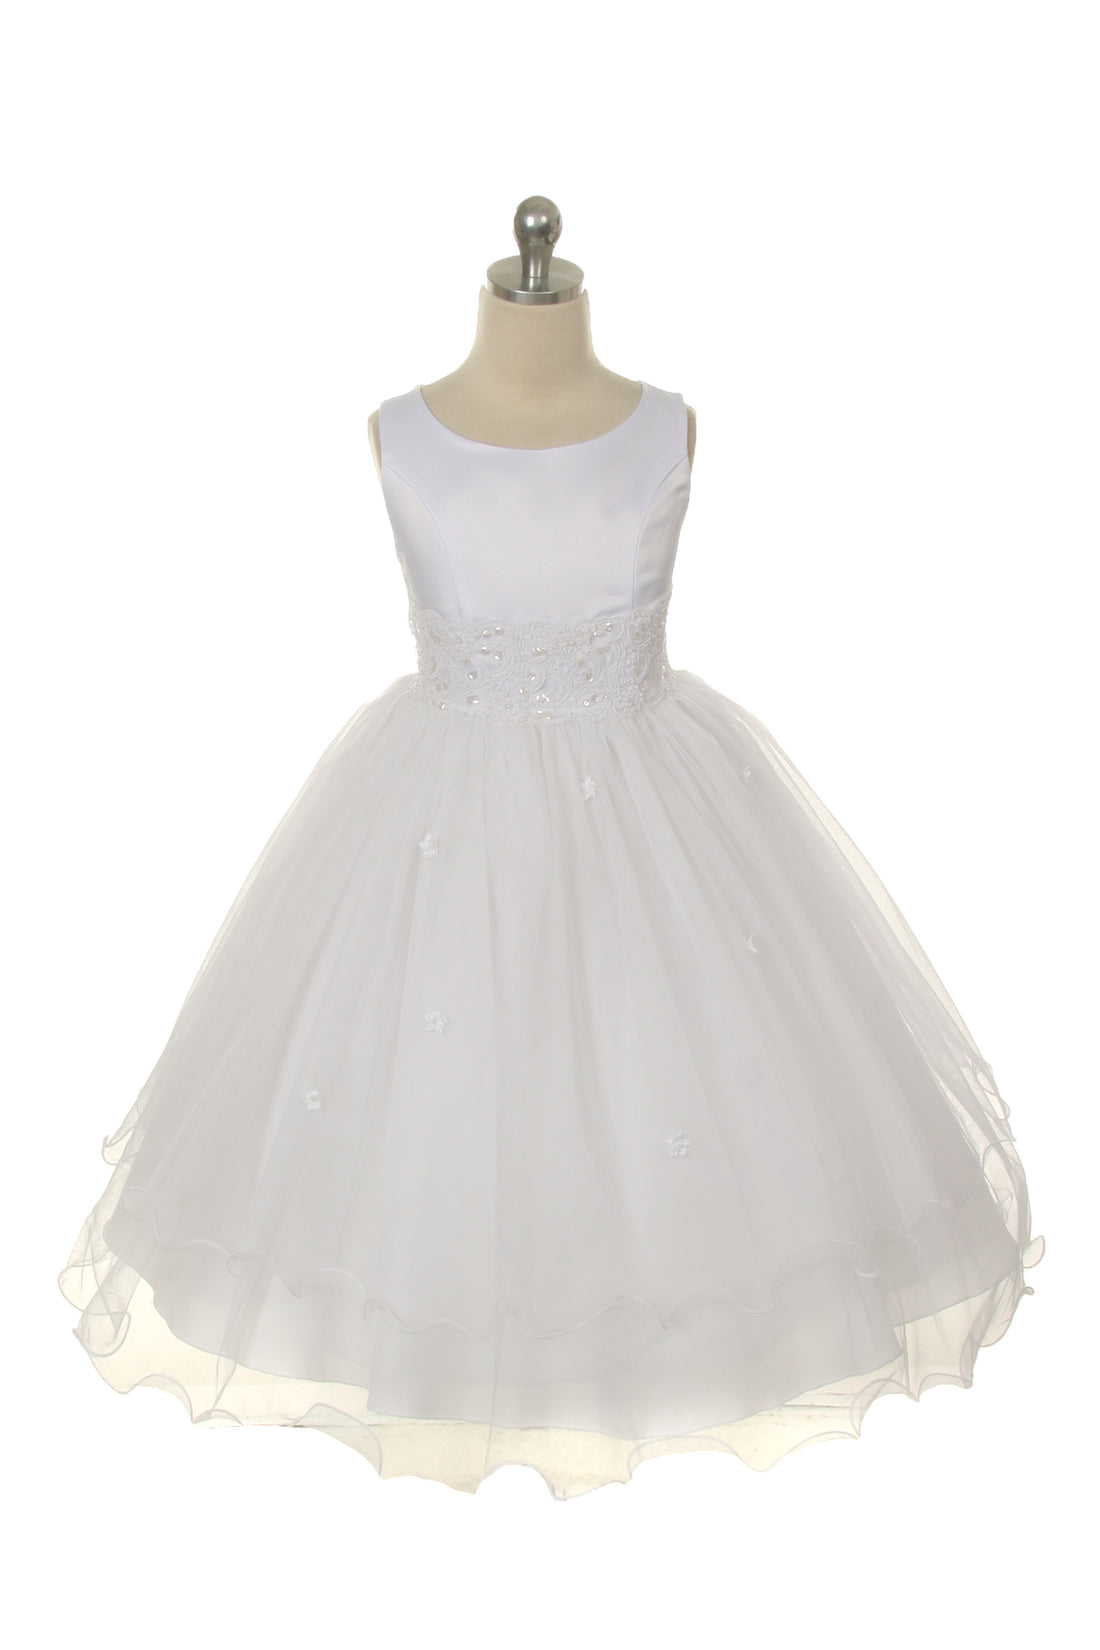 Girl Party Lace Trim Long Tulle Dress by AS198 Kids Dream - Girl Formal Dresses